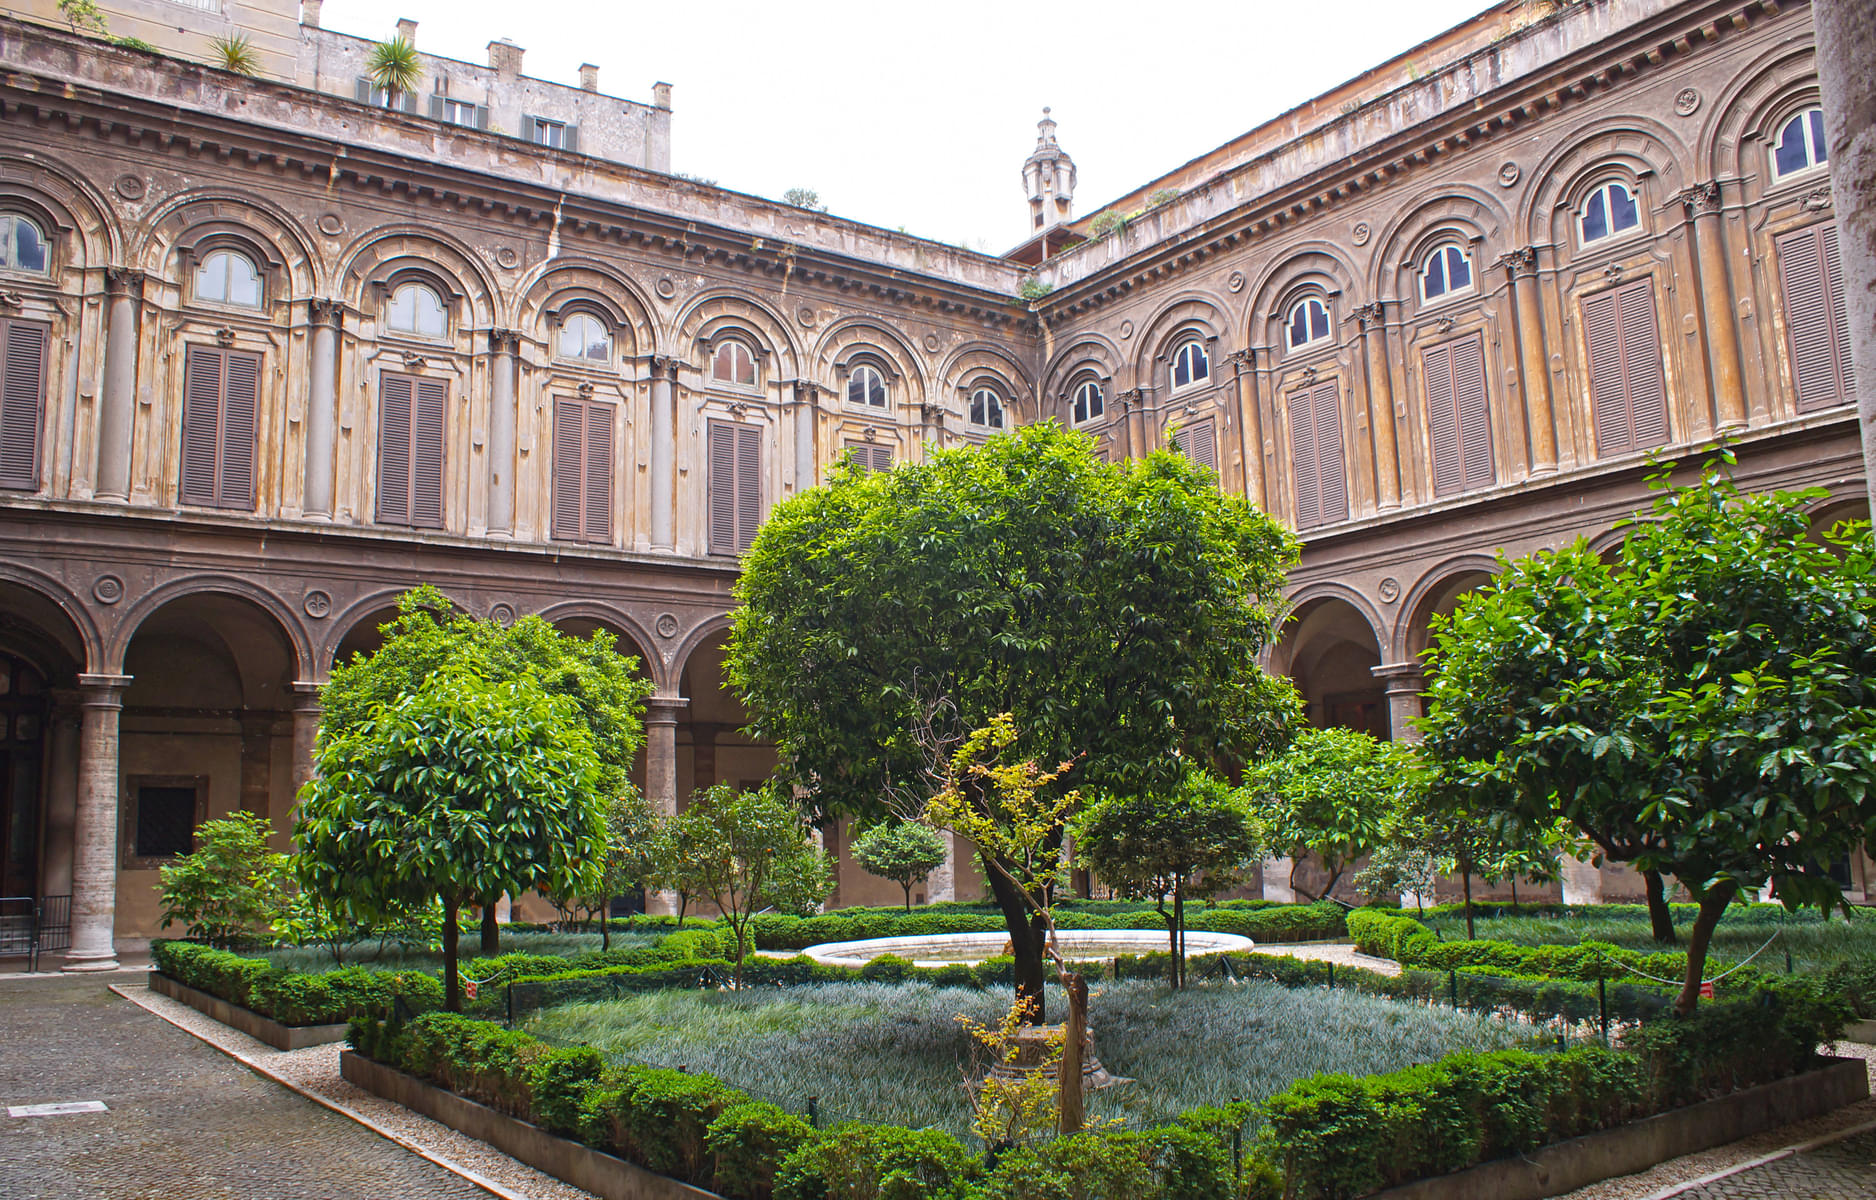 Plan your visit to the Doria Pamphilj Gallery showcasing Rome's wide art collections